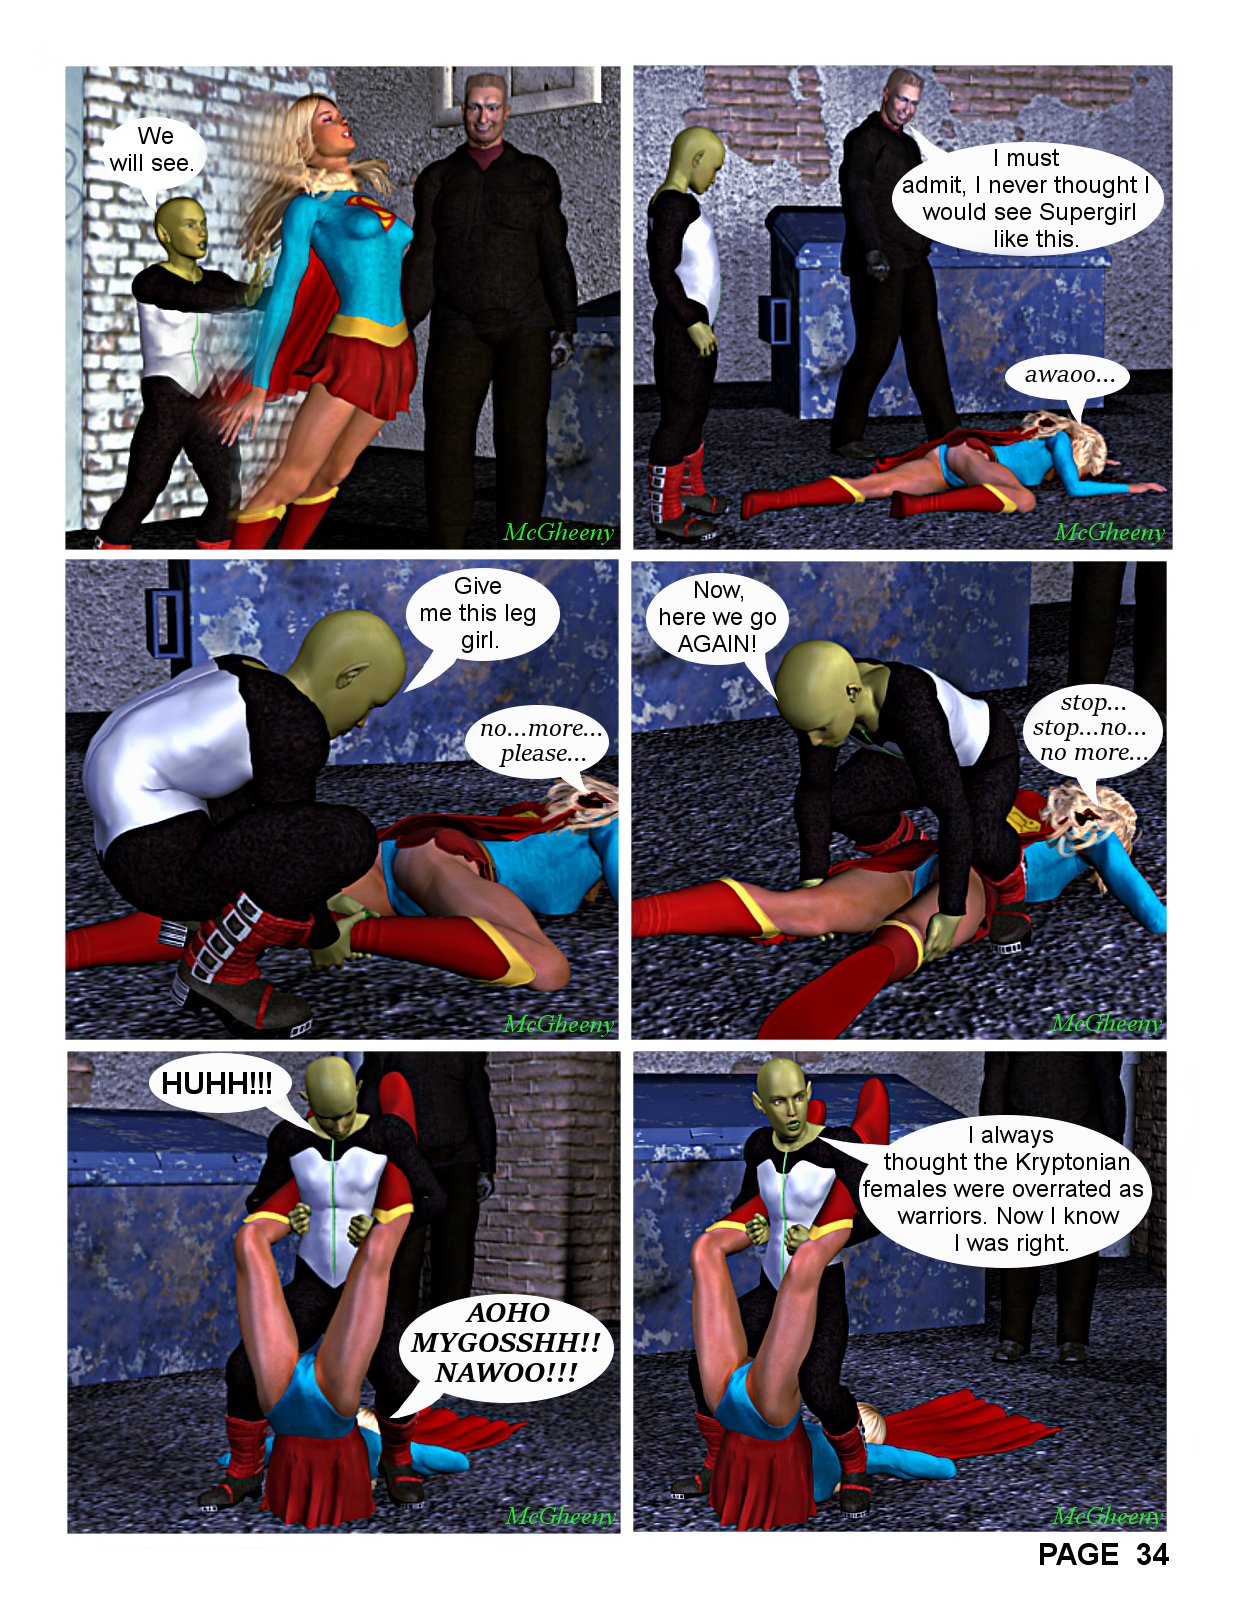 Supergirl in Banors Prize Page 34.png